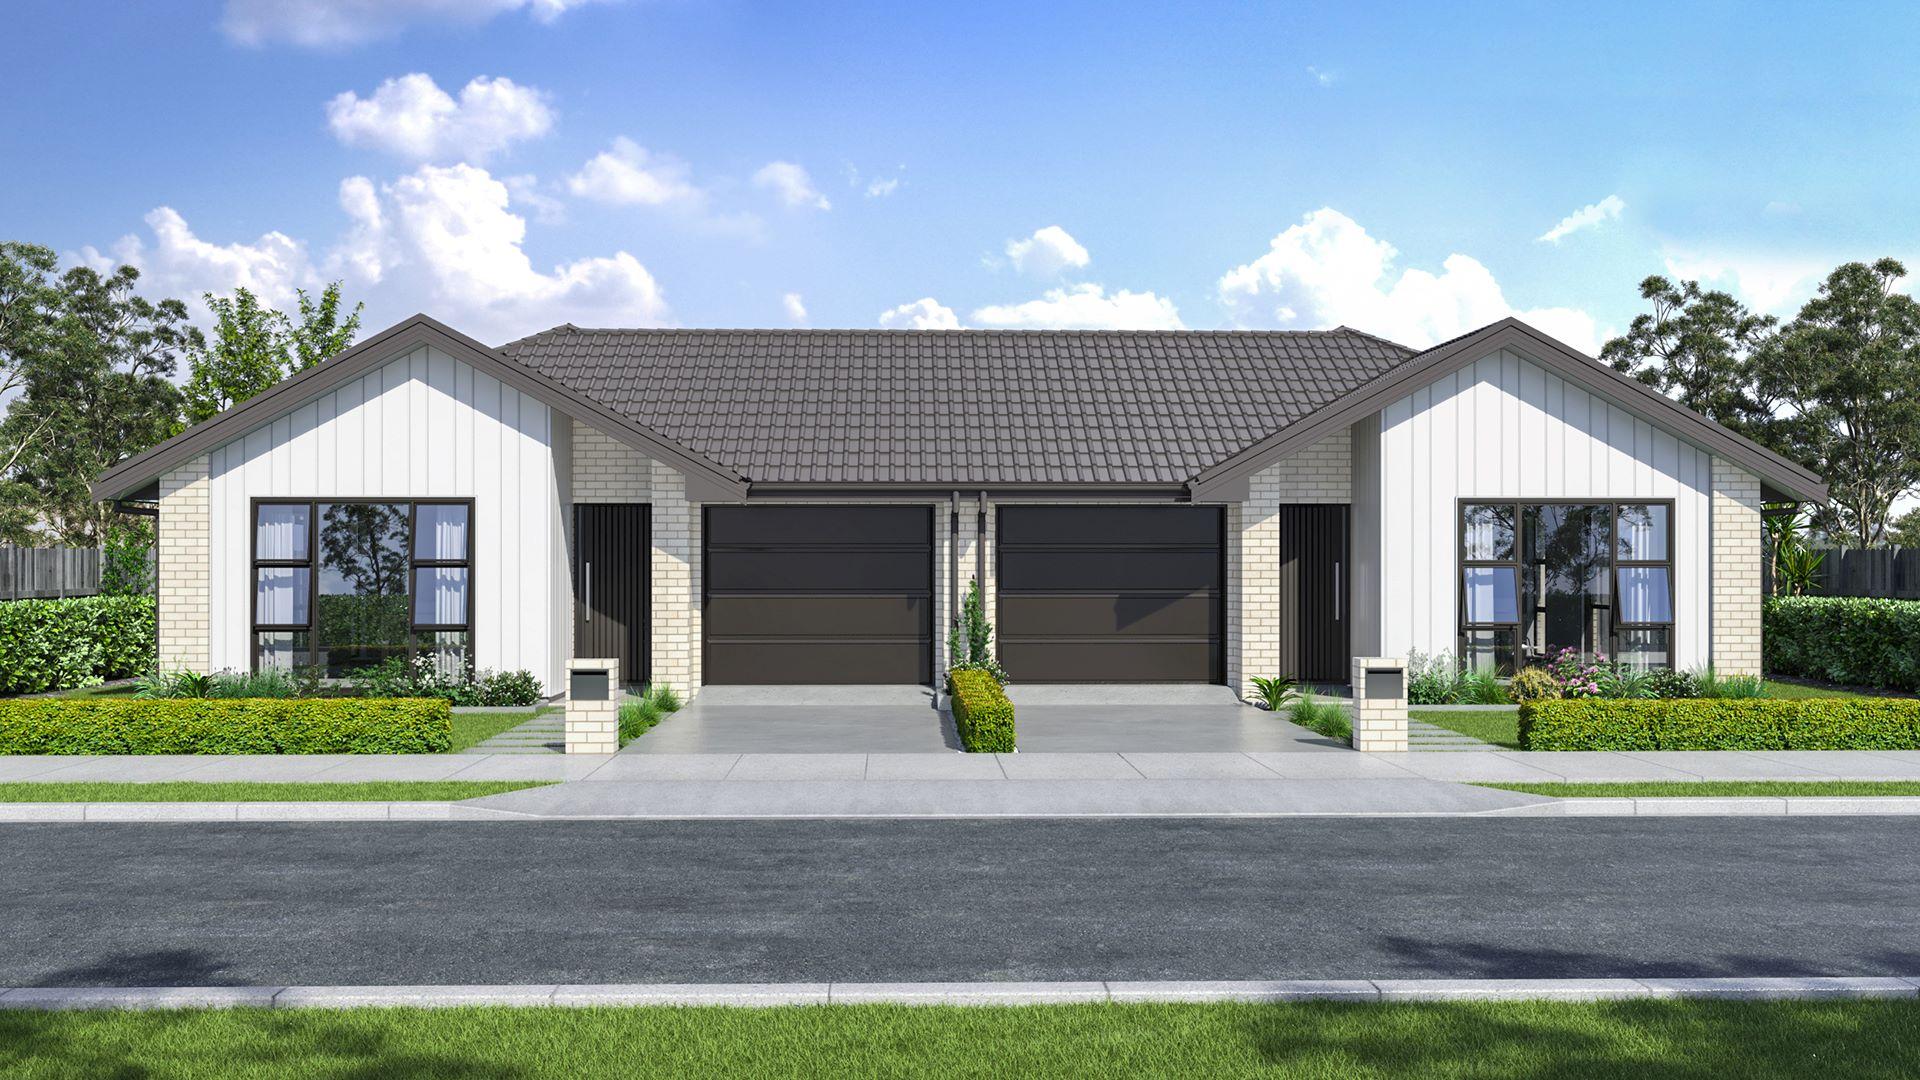 Paerata Rise: 3 Bedroom Home under construction! image, index 0